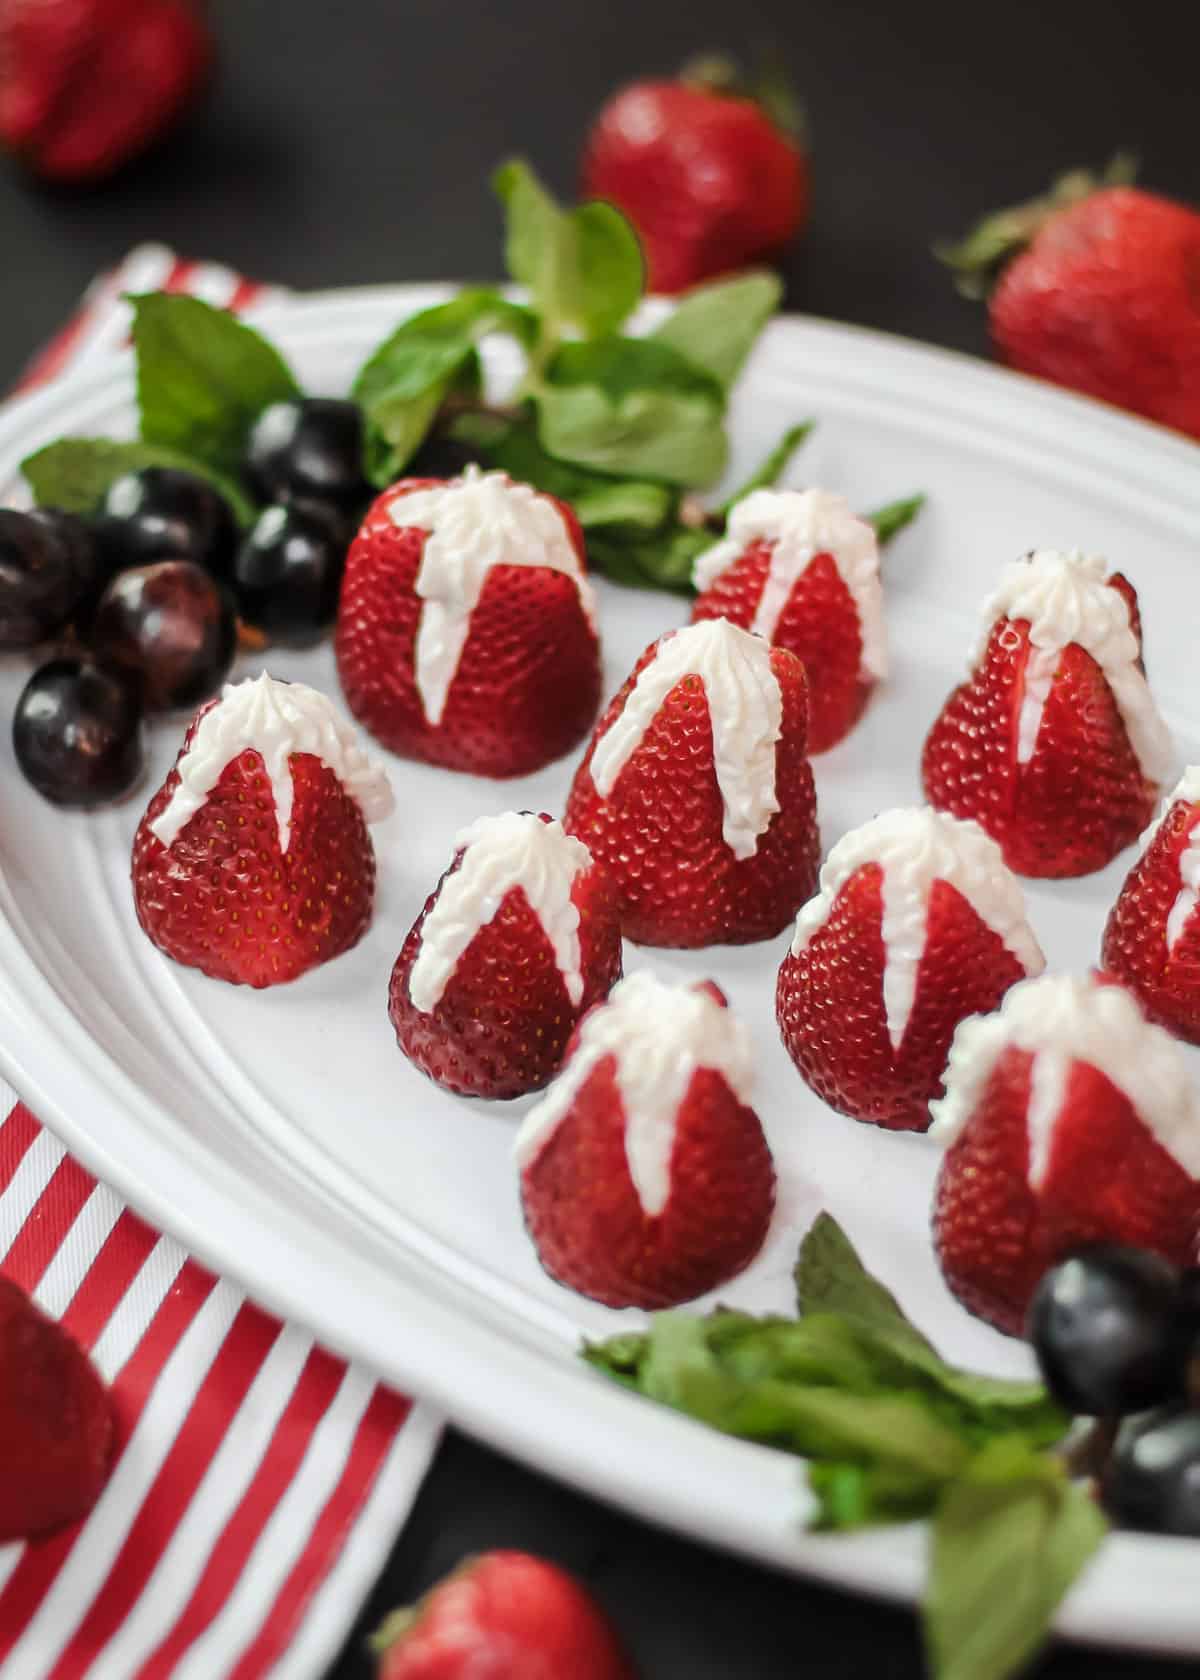 strawberries stuffed with cheesecake filling, on white platter garnished with grapes and mint leaves.